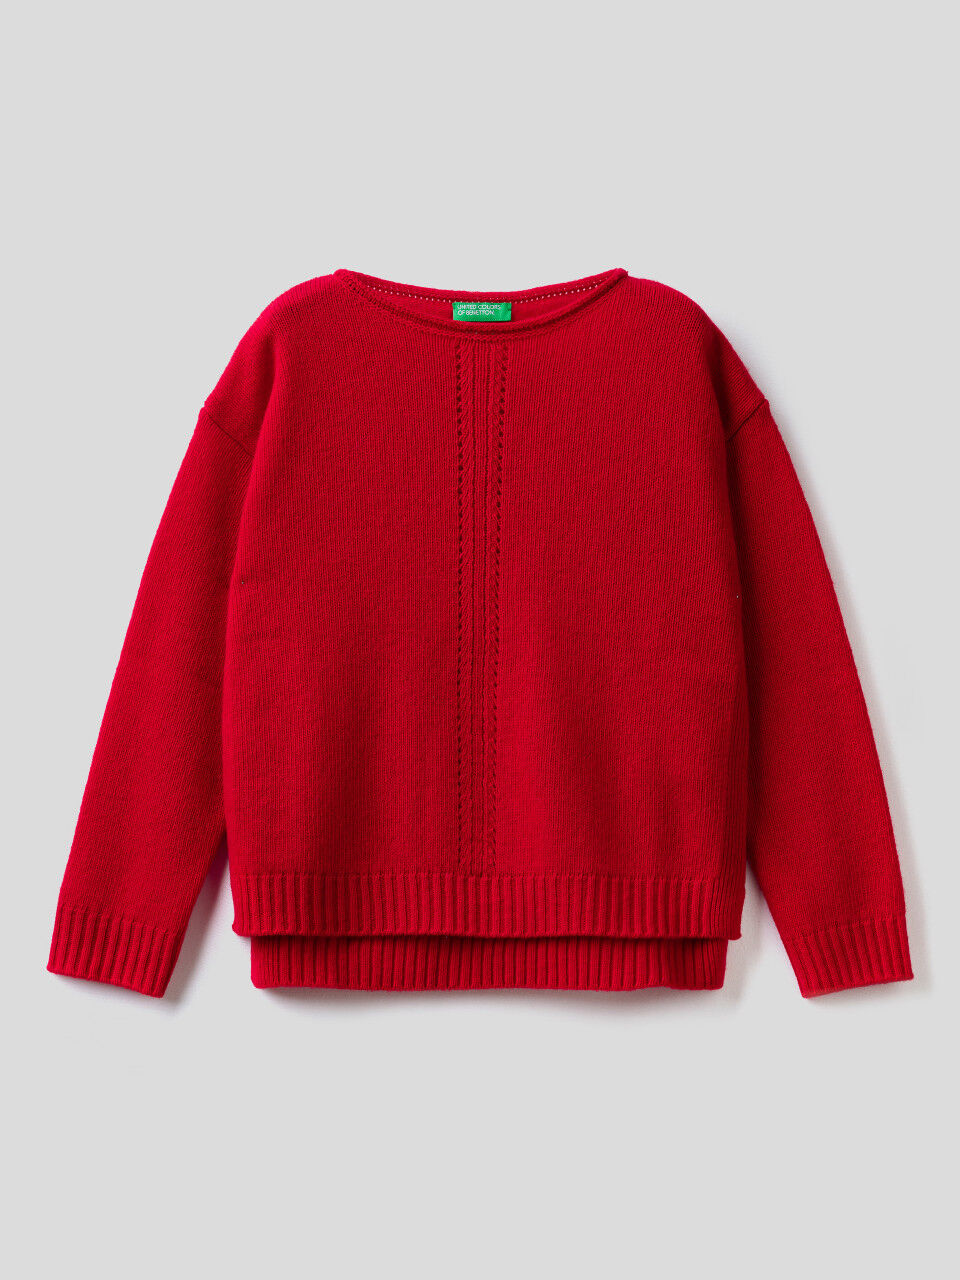 Junior Girls' Sweaters and Knitwear New Collection 2022 | Benetton